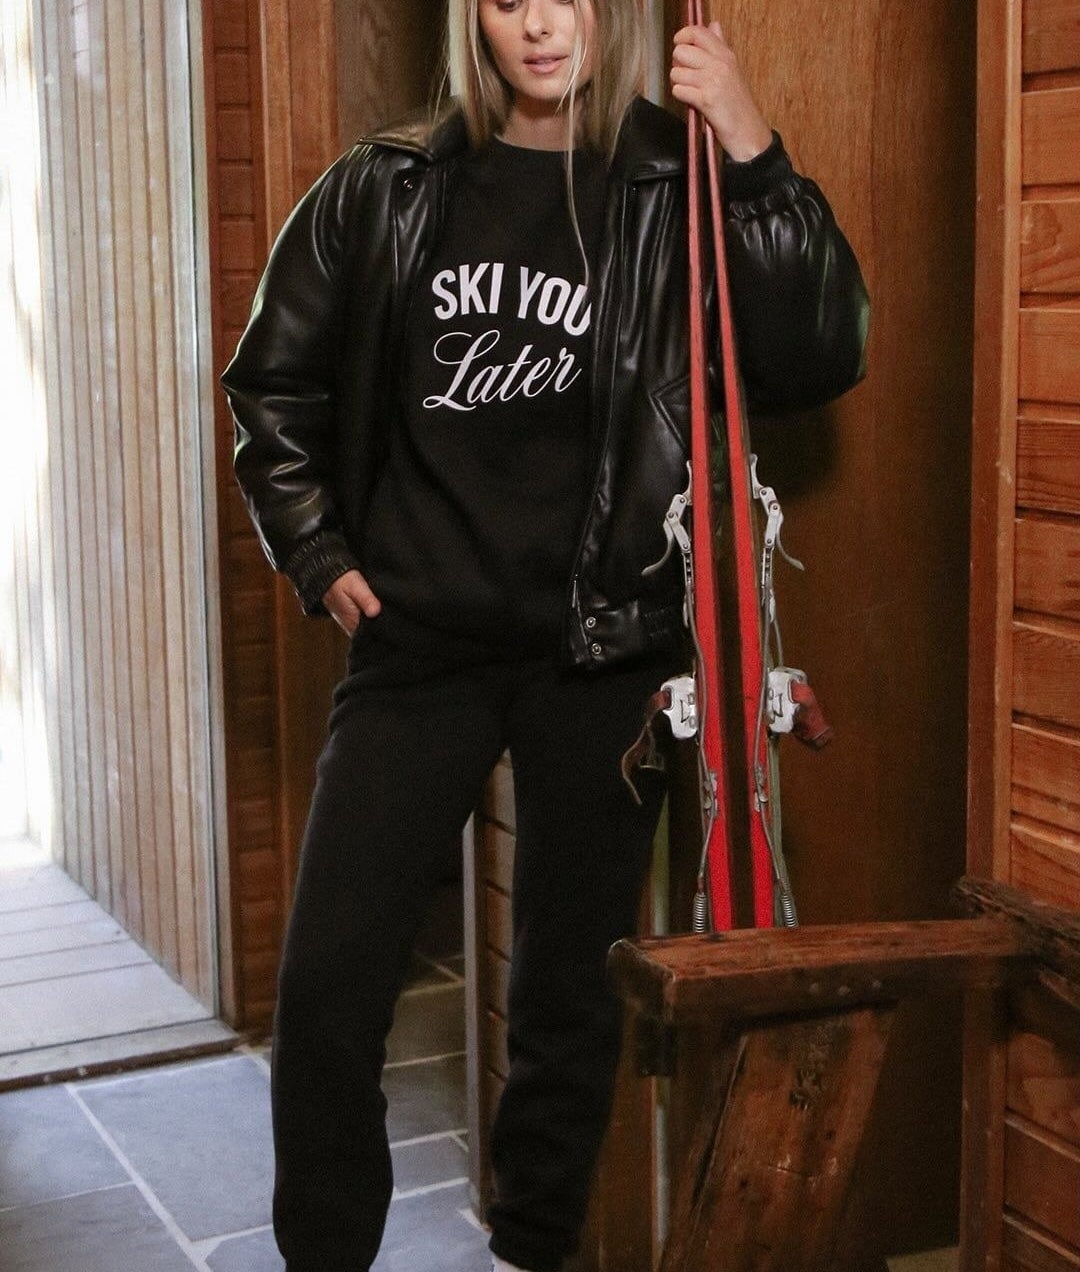 A person wearing the crewneck and holding skis